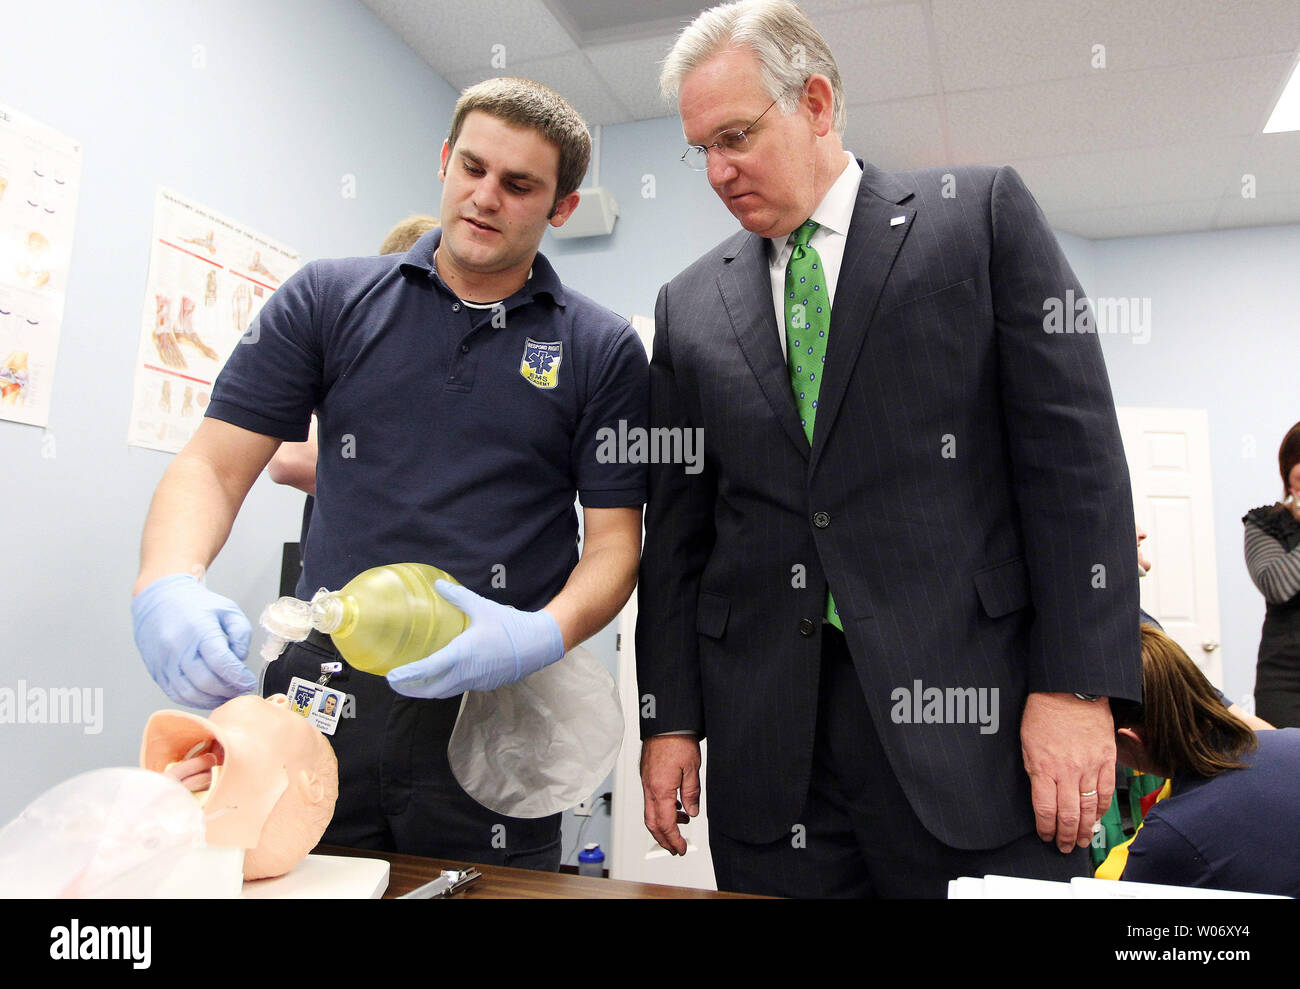 Missouri Governor Jay Nixon (R) looks on as paramedic student Mike Hollingsworth demonstrates how to intubate a patient at the Respond Right EMS Academy before talking with area business leaders during a roundtable discussion in St. Peters, Missouri on April 8, 2011. Nixon was on hand to discuss a new $27 million program designed to invest in small businesses across the state. The program, known as the State Small Business Credit Initiative, will begin accepting applications for loans from Missouri entrepreneurs today.  UPI/Bill Greenblatt Stock Photo